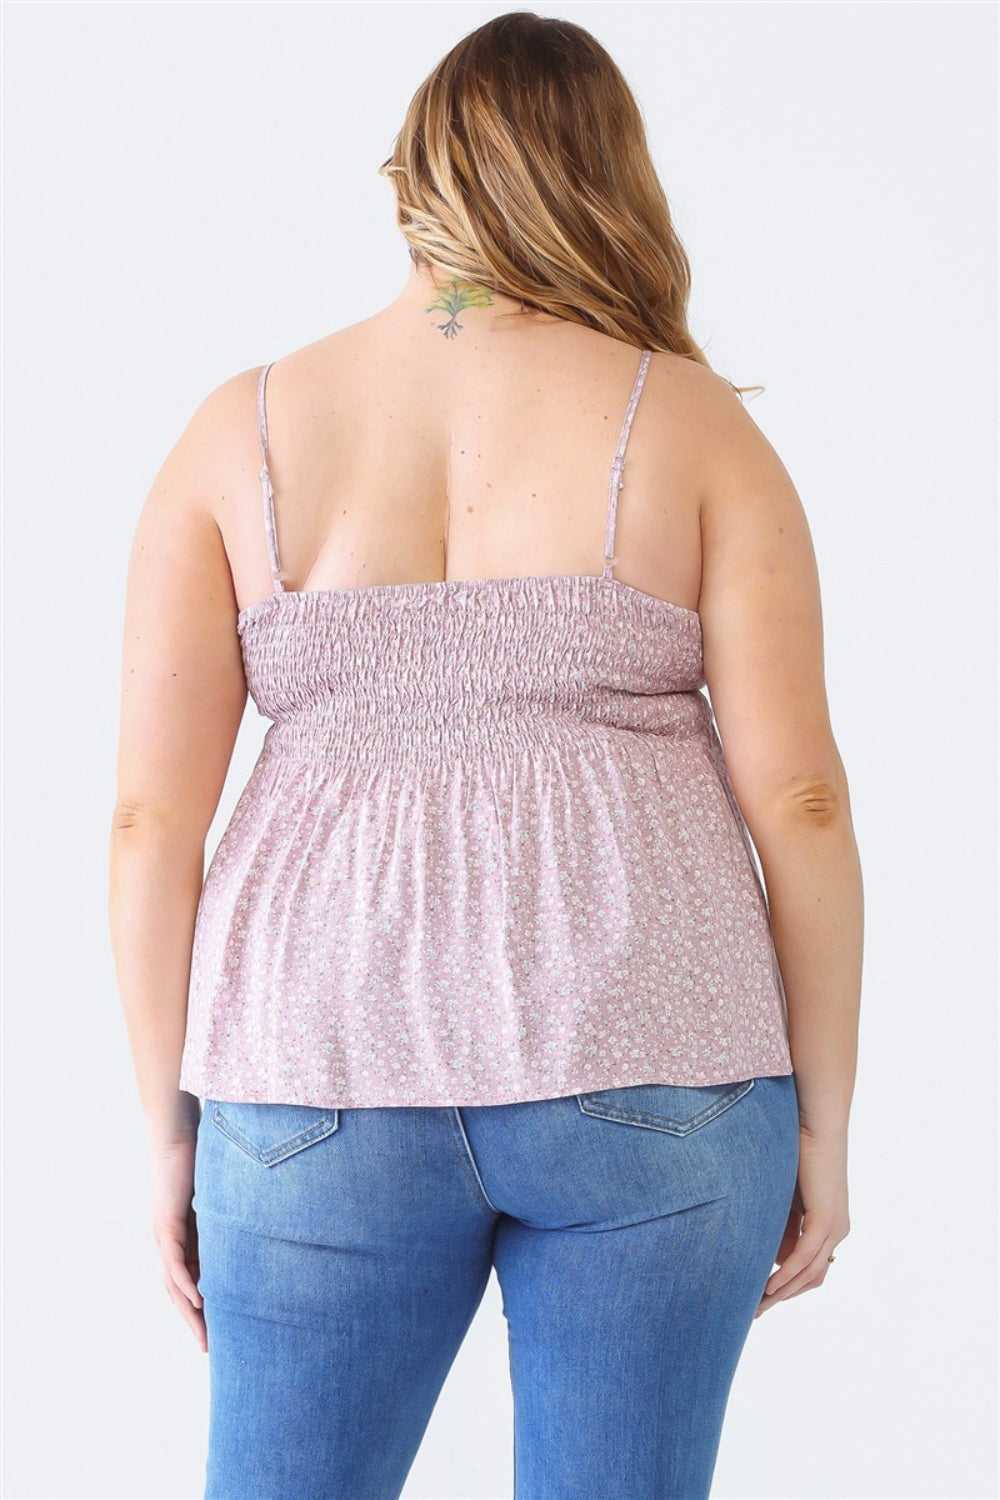 Zenobia Plus Size Frill Smocked Floral Sweetheart Neck Cami - PLUS TOPS - Mixed